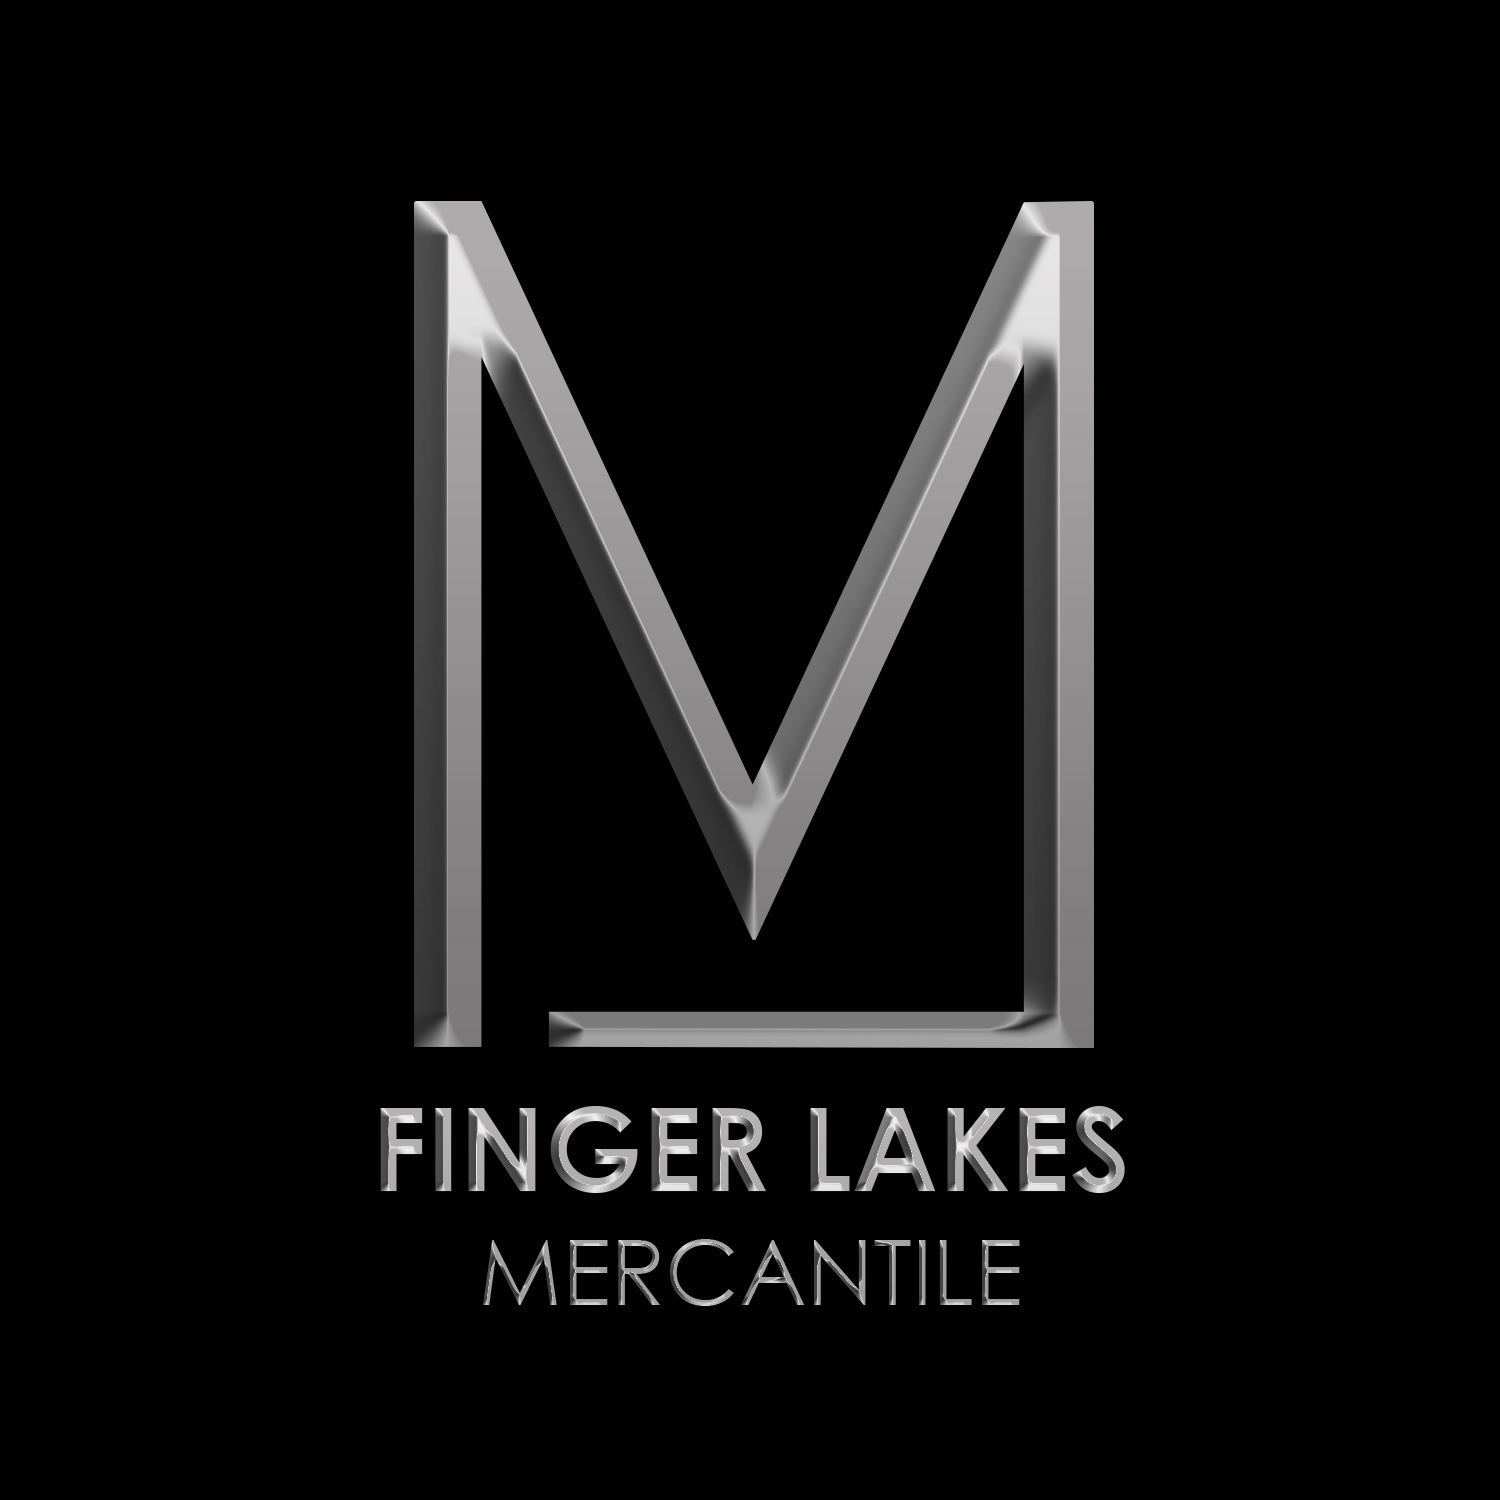 Finger Lakes Mercantile offers custom laser engraving and graphic design services.